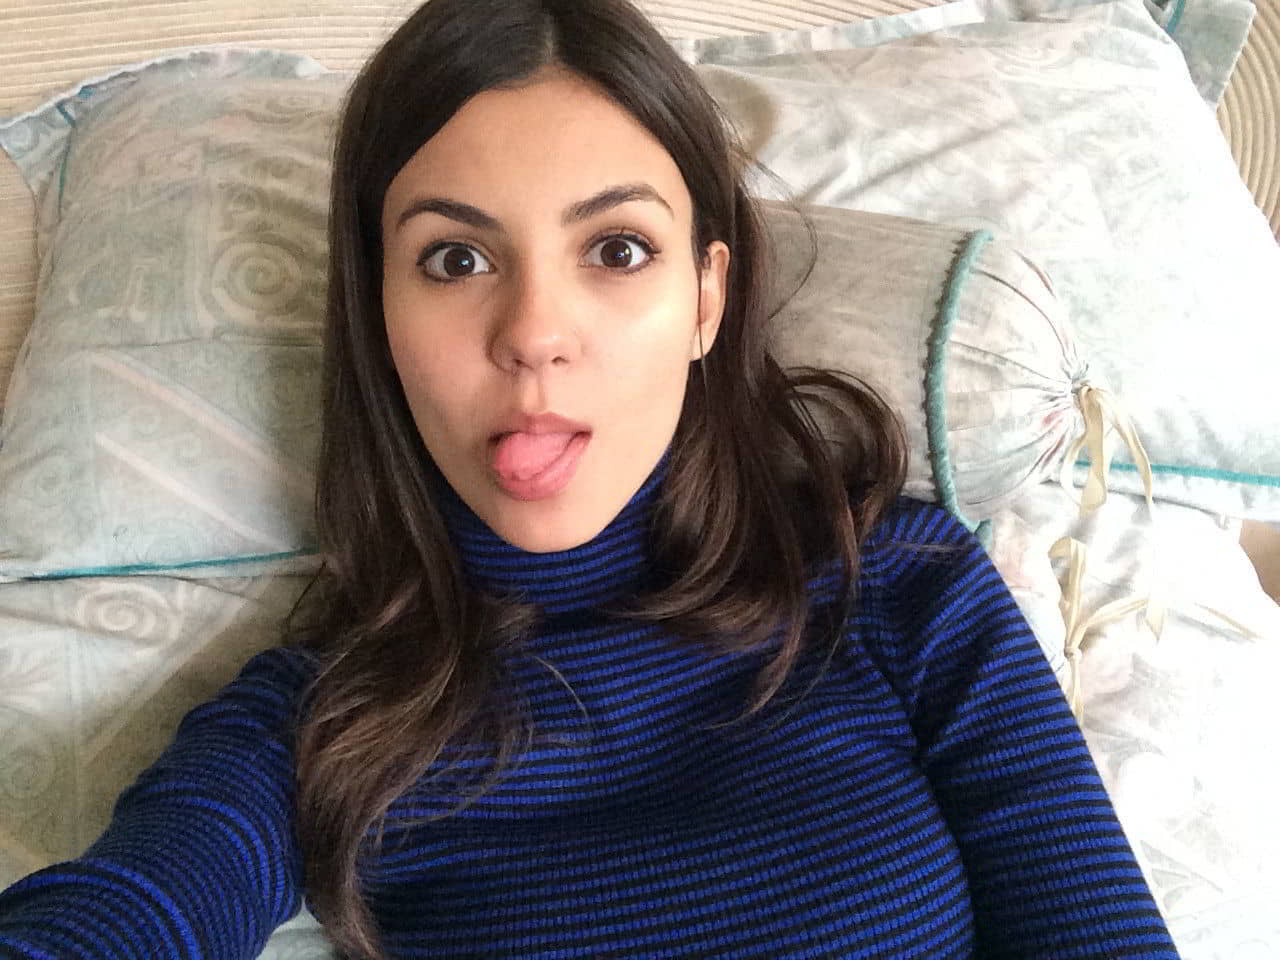 victoria-justice-leaked-cellphone-pictures-18_1.jpg